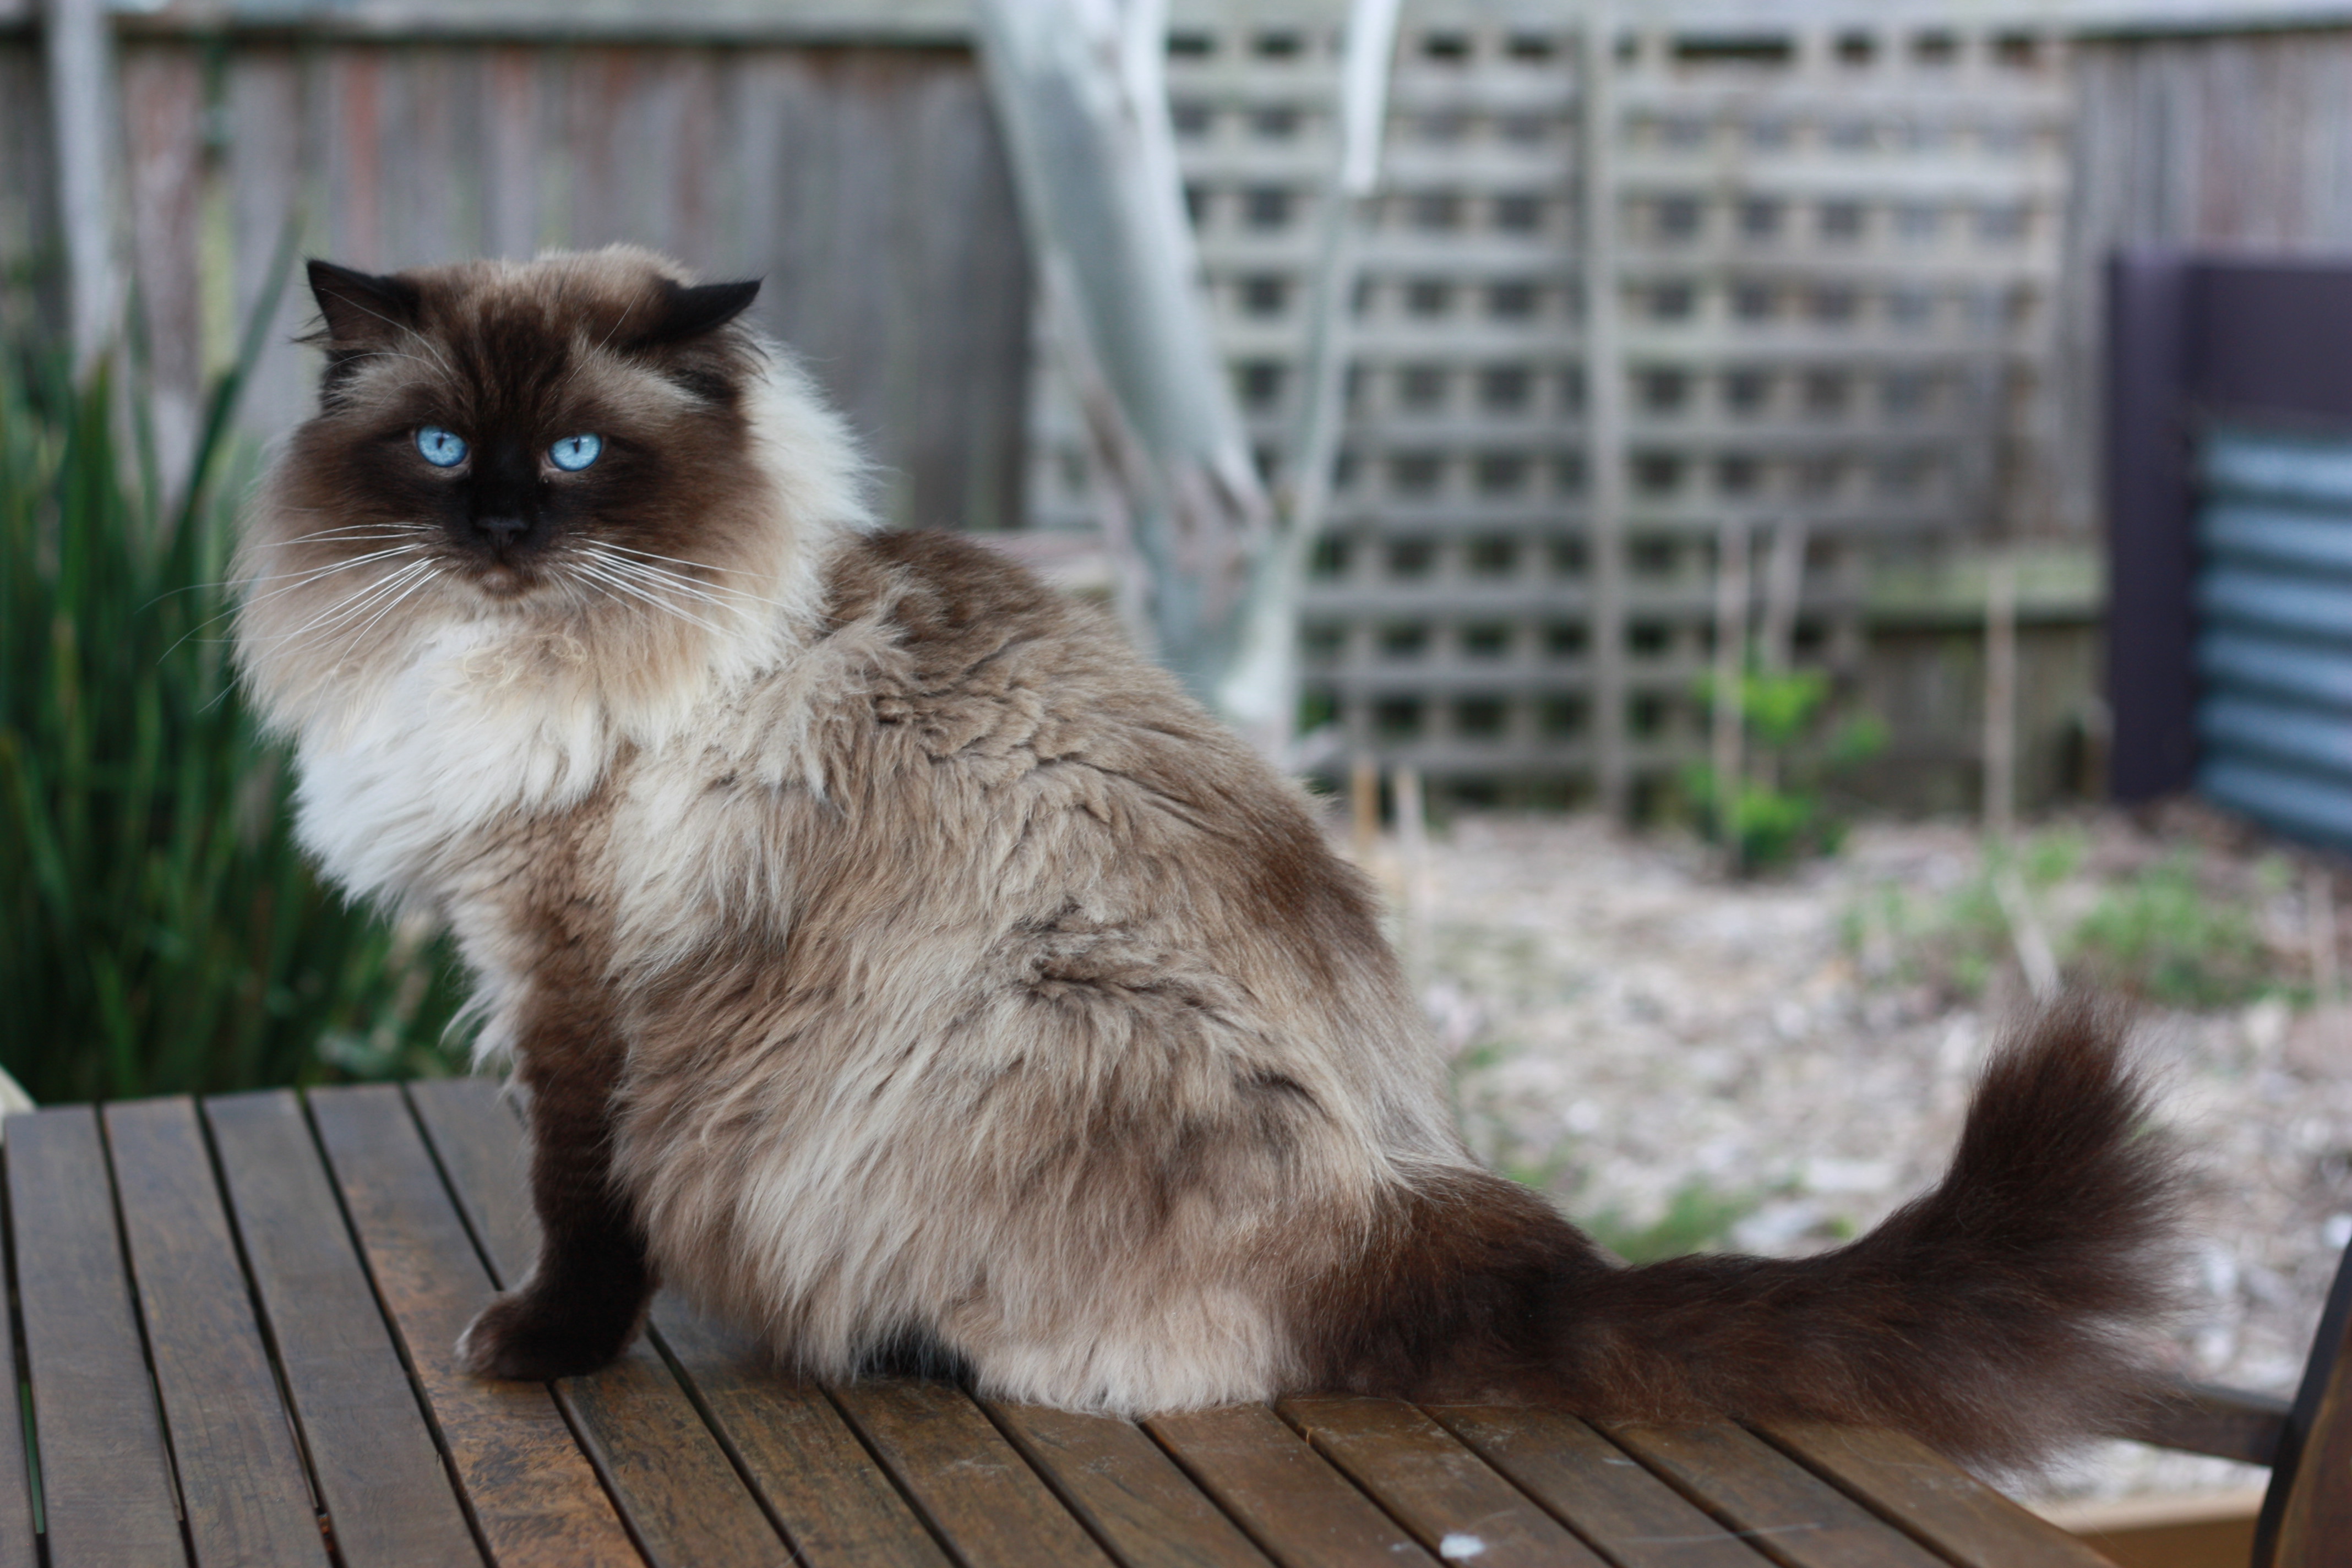 Our cats | Craigdolls Ragdoll Cats - ANCATS breeder in Blue Mountains ...